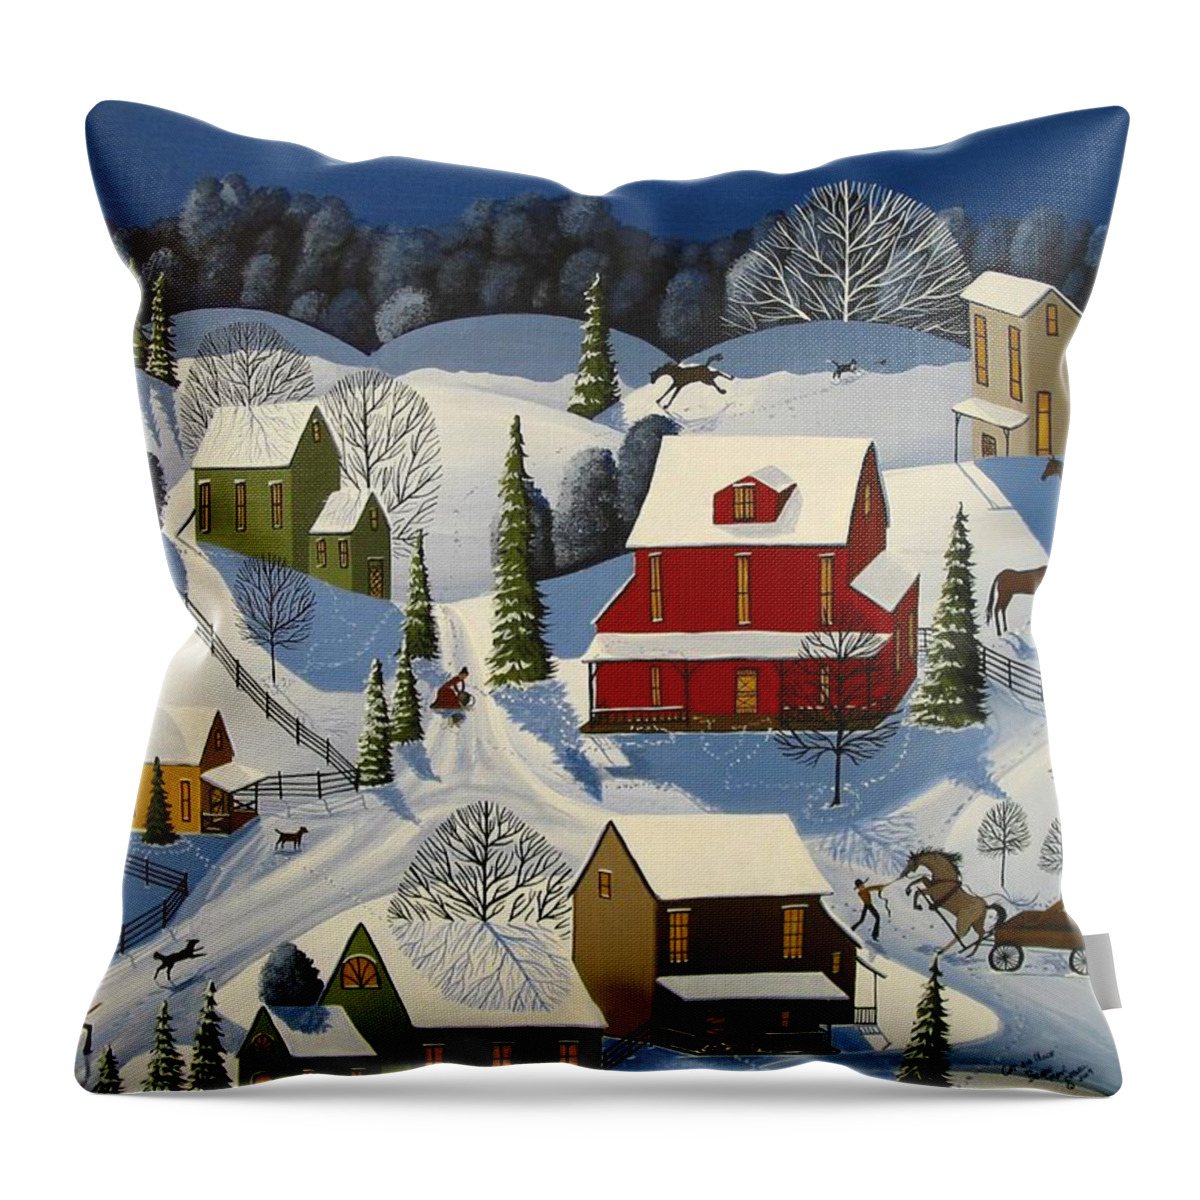 Folk Art Throw Pillow featuring the painting Cat And Mouse by Debbie Criswell